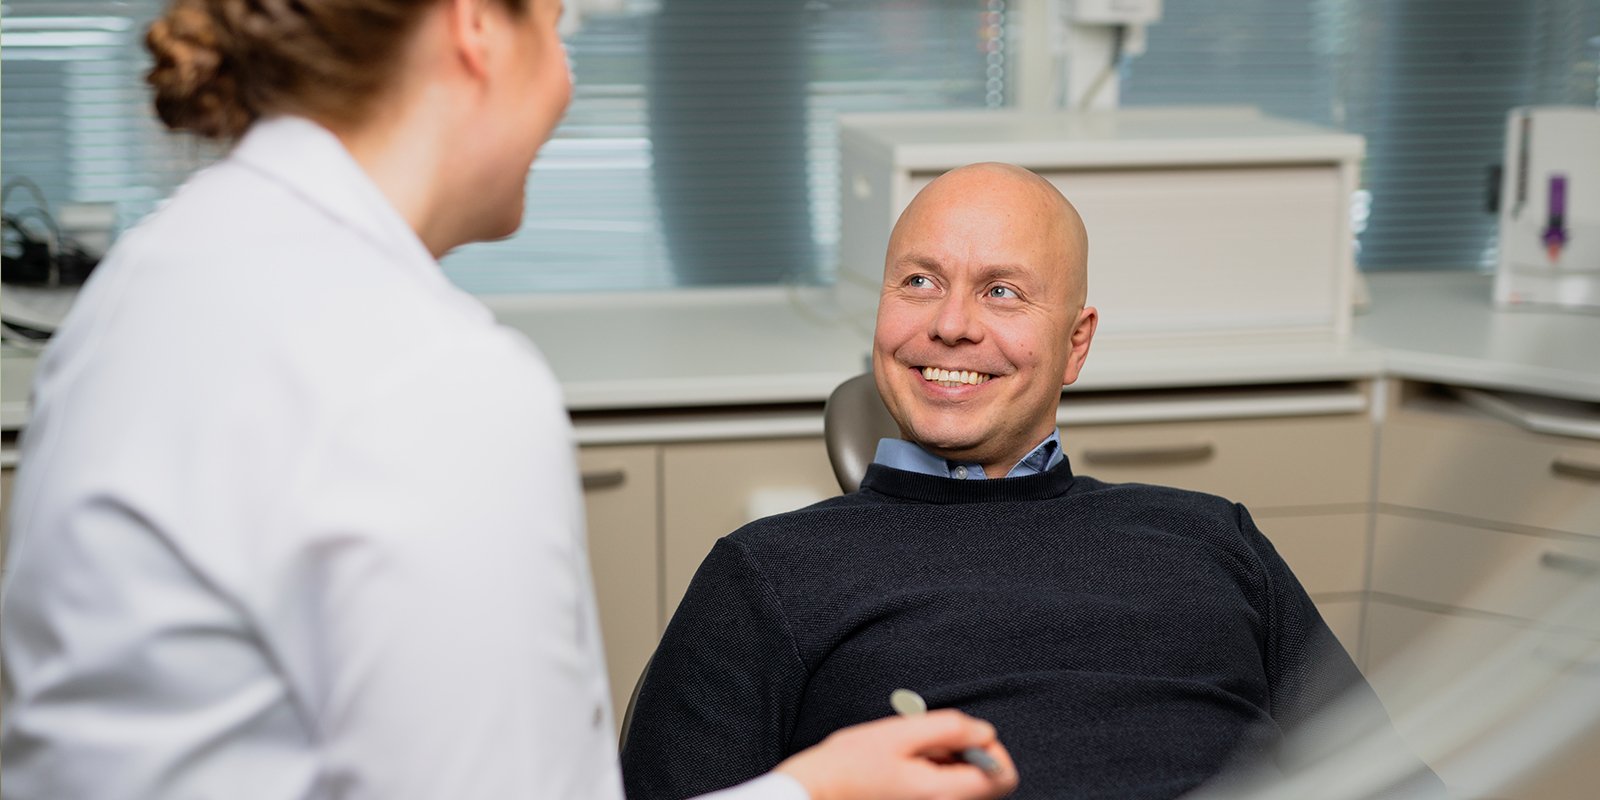 A man sits in a dental chair and smiles widely